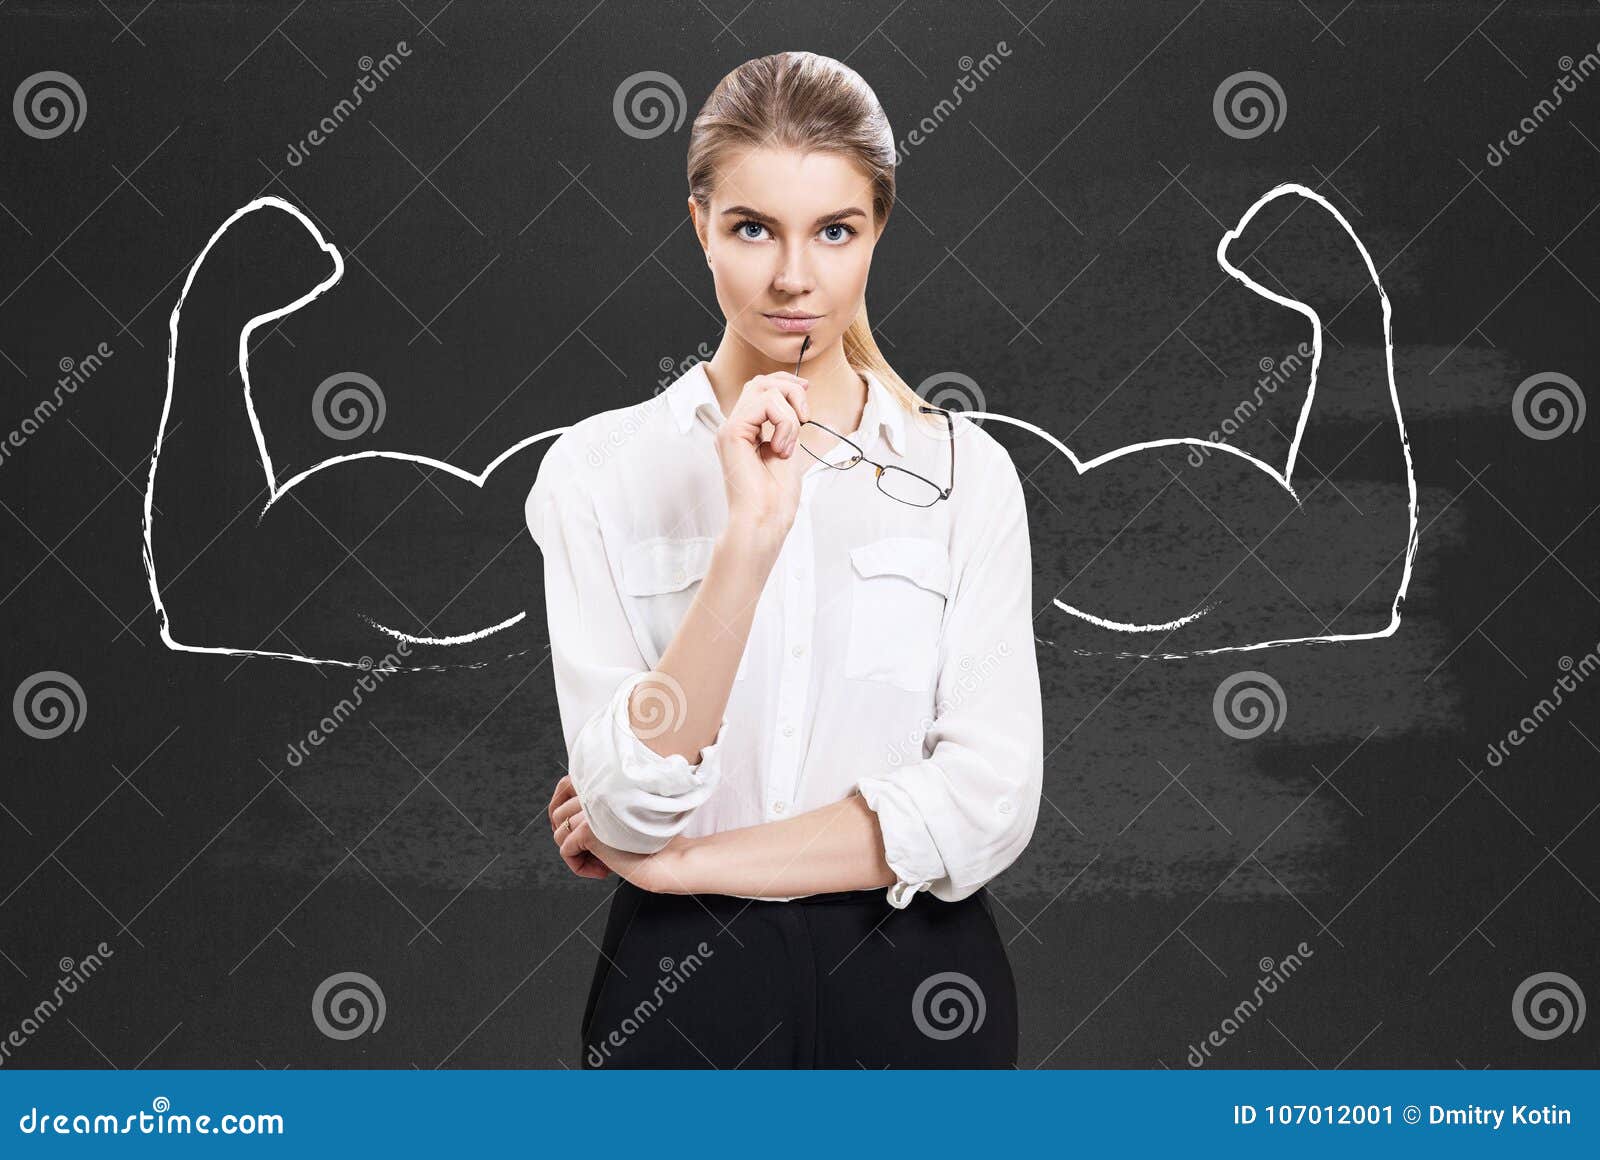 business woman with drawn powerful hands.